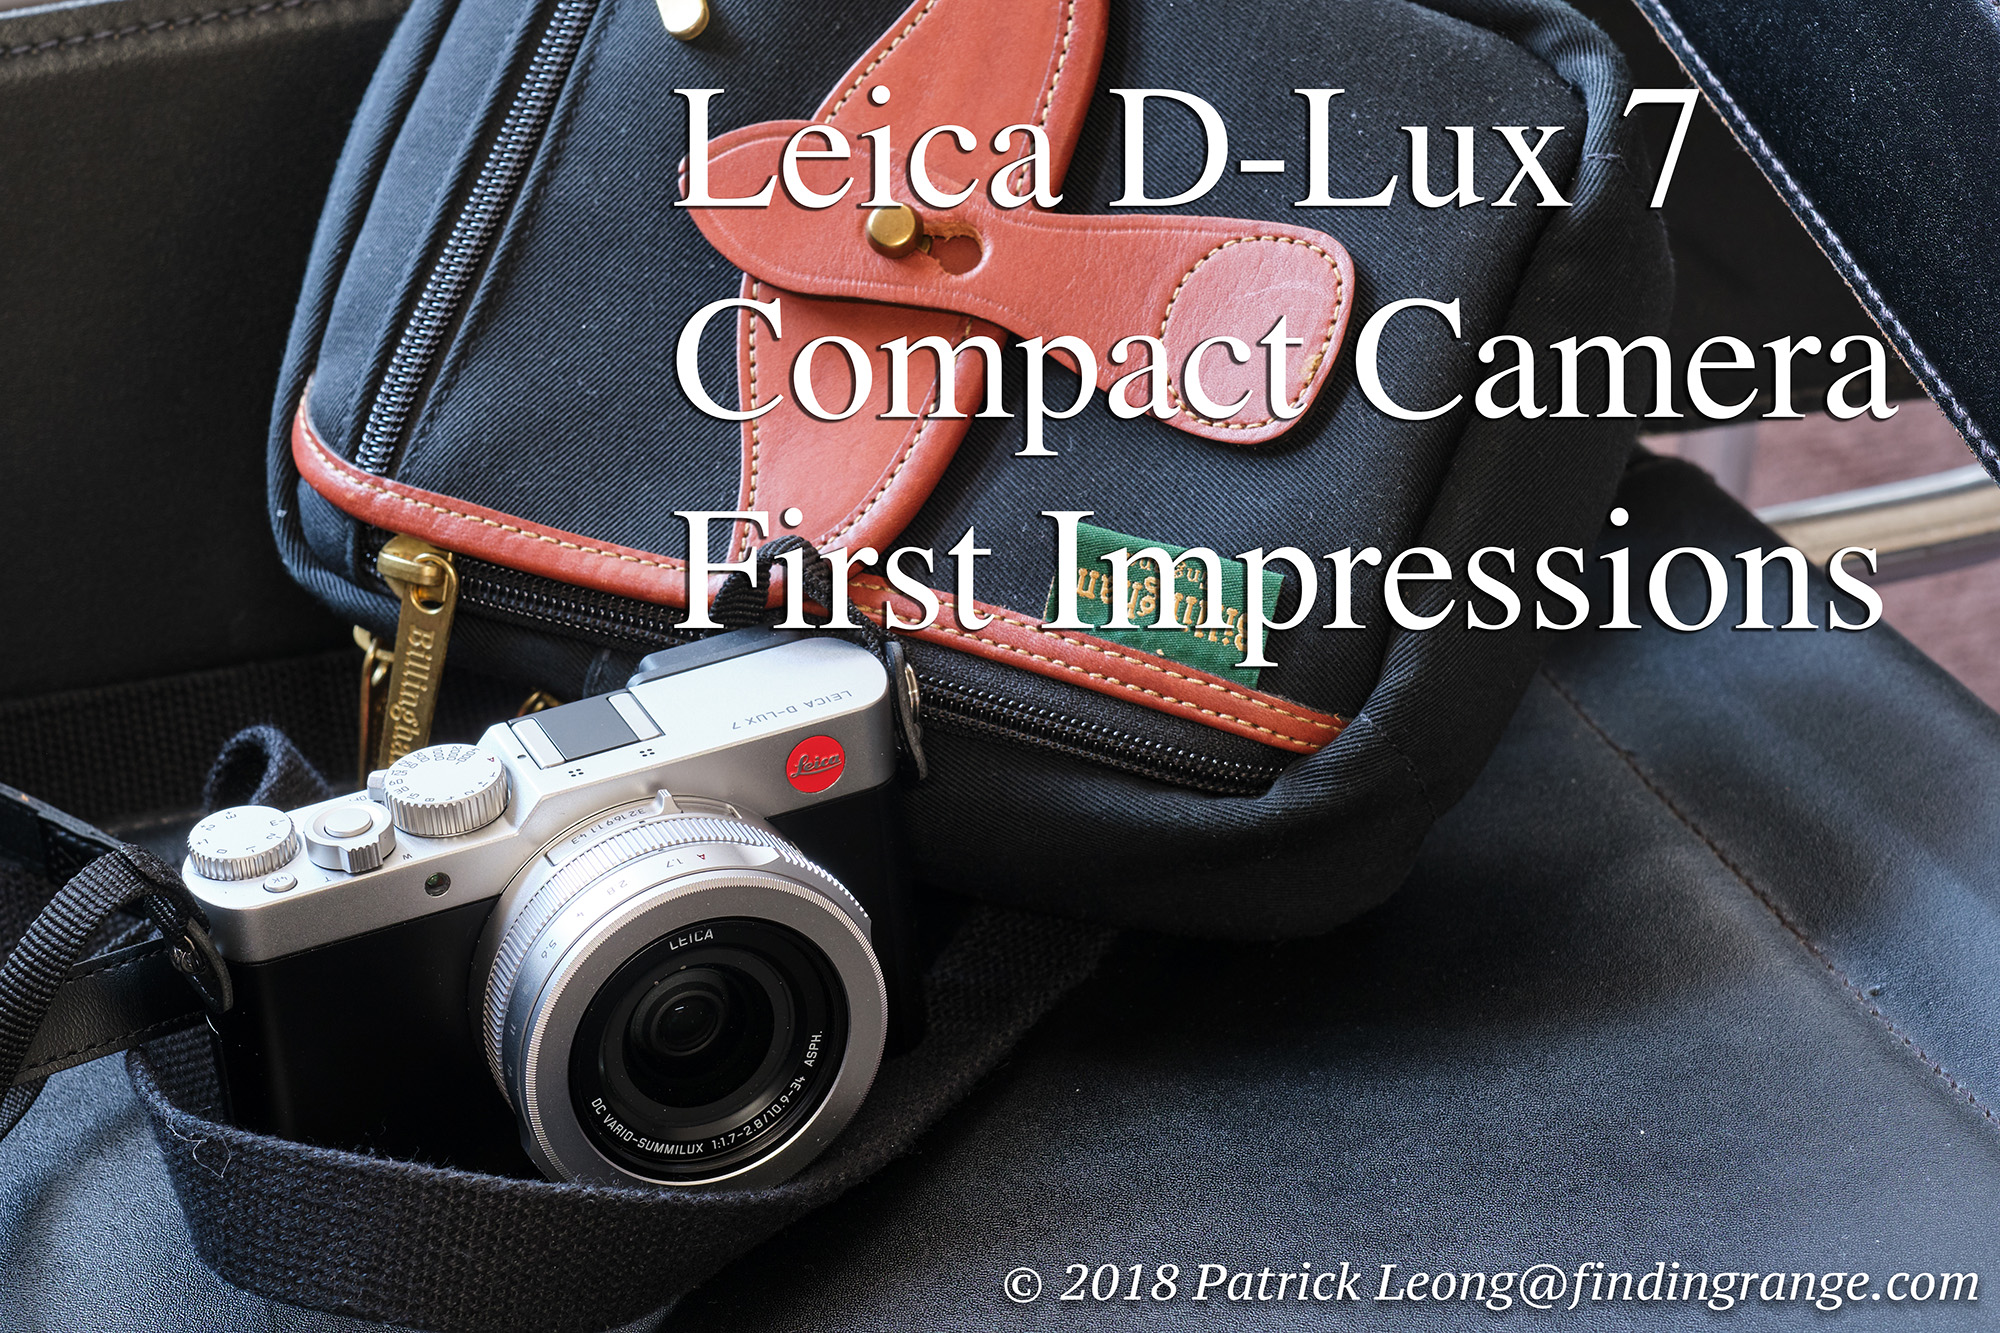 Unboxing the Leica D-Lux 7 007 Edition 